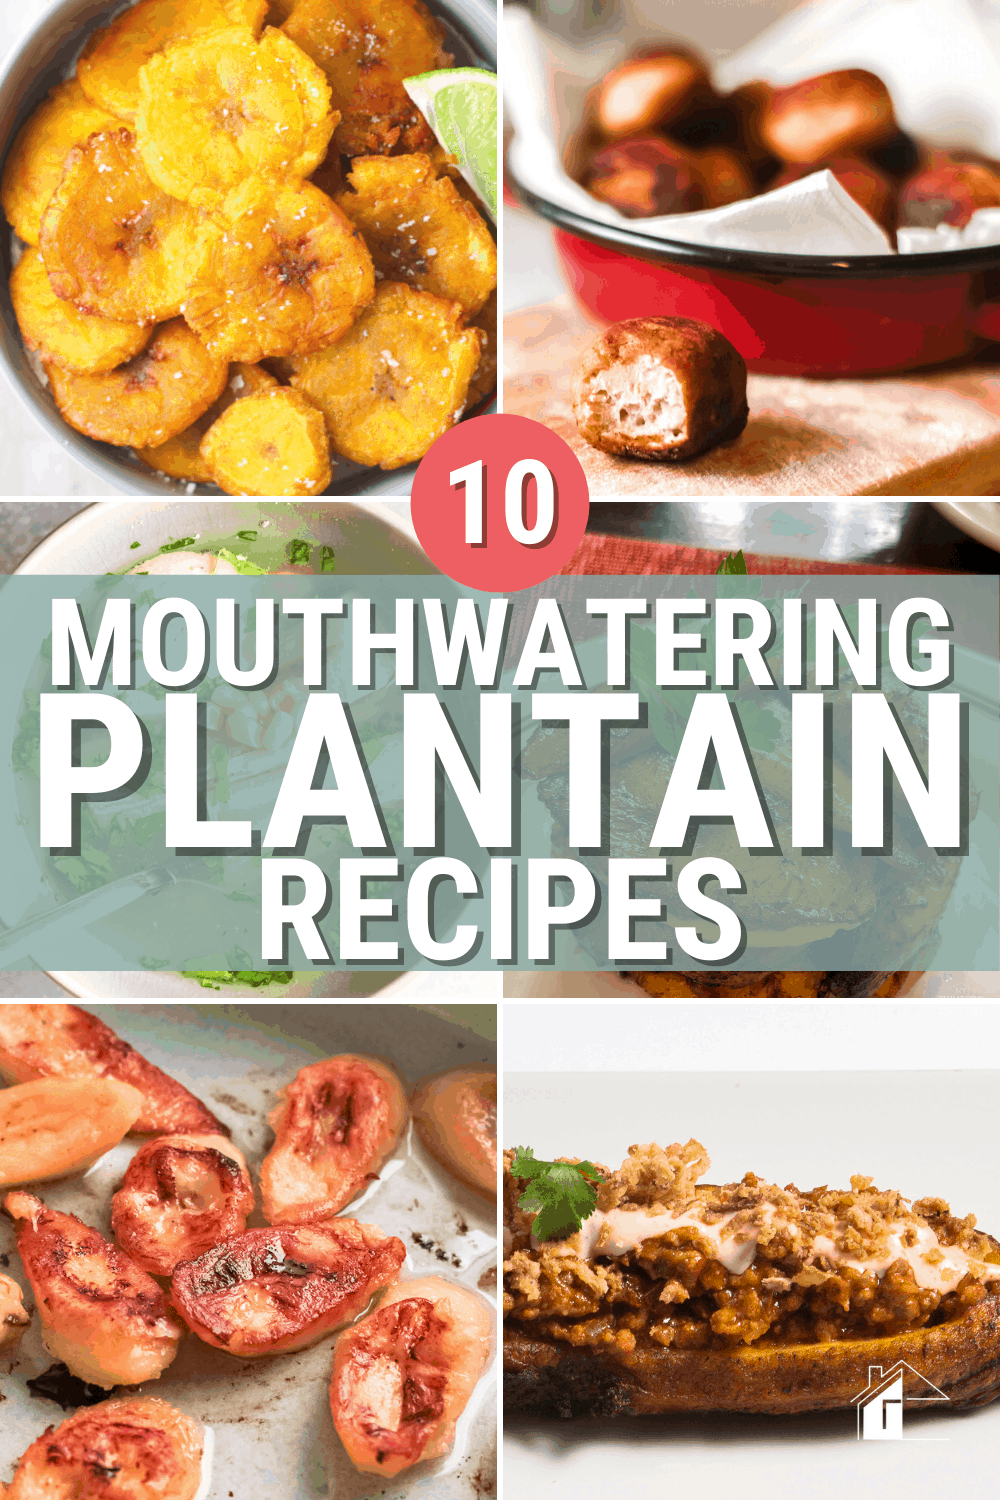 Why are plantains so popular in Latin America? Check out these recipes to find out from Mofongo to plantain soup. You will fall in love. via @mystayathome